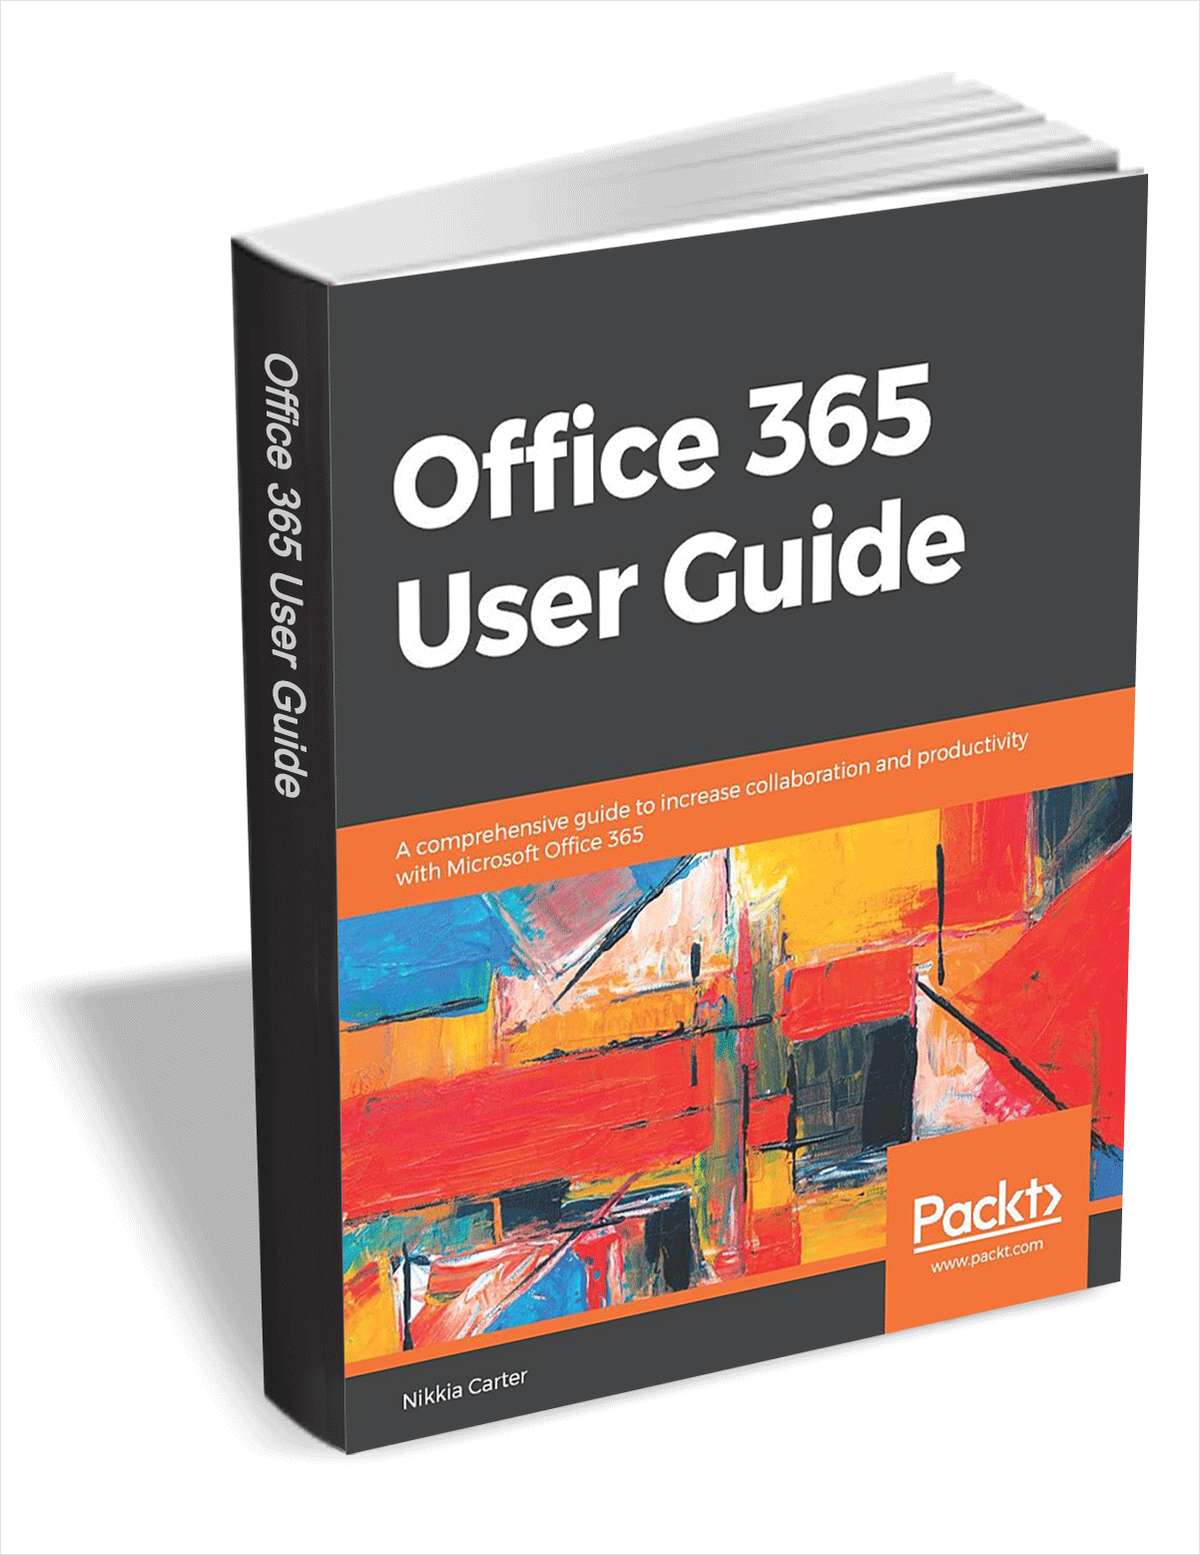 ebook:-“office-365-user-guide-($23.99-value)-free-for-a-limited-time”